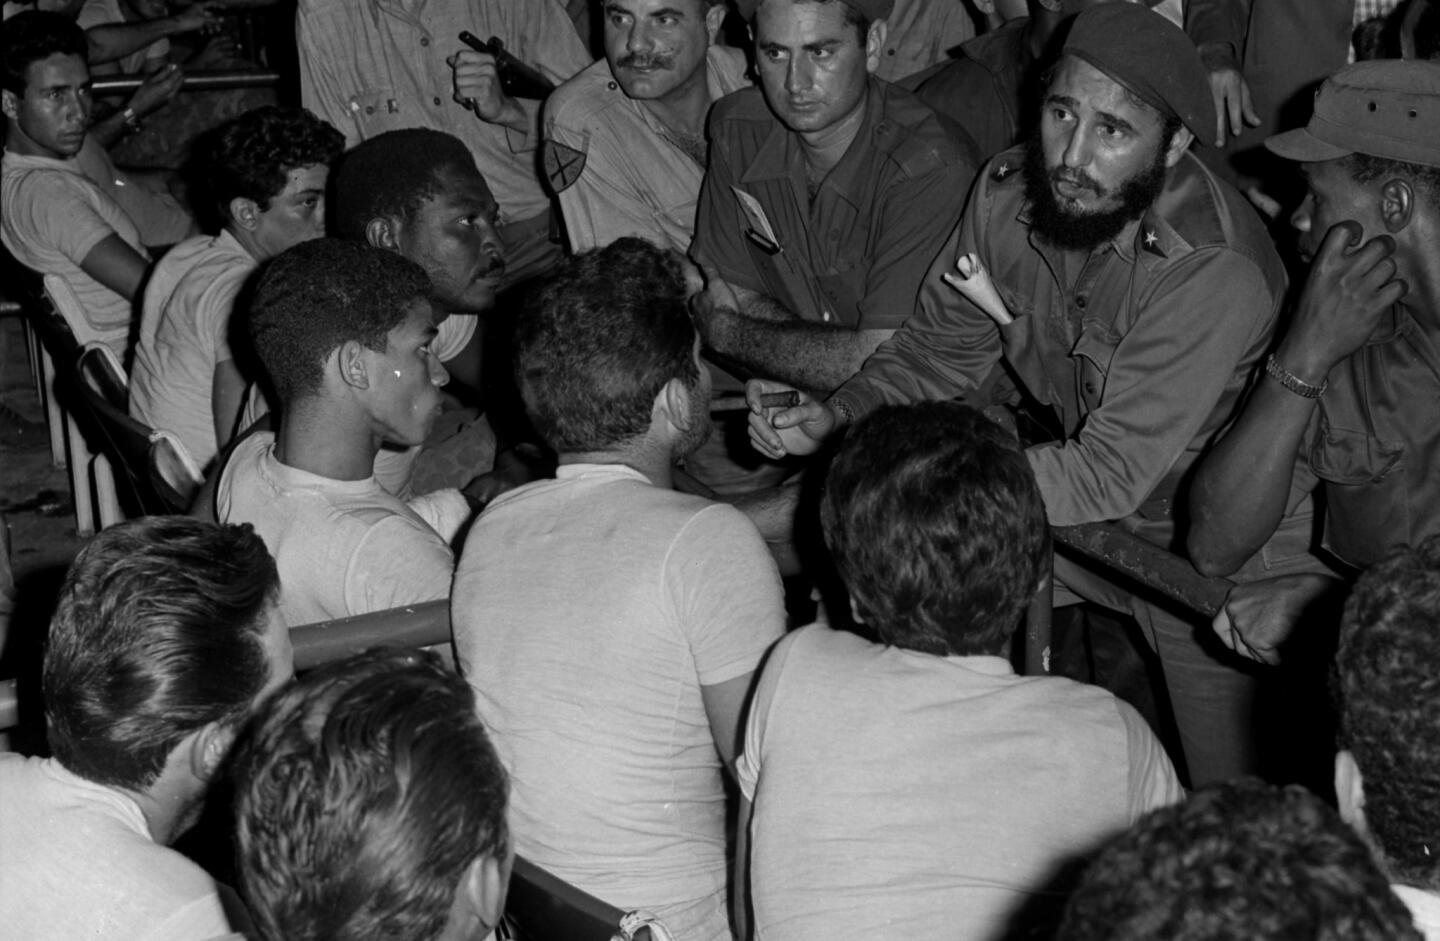 Castro speaks with prisoners at Bay of Pigs - 1961